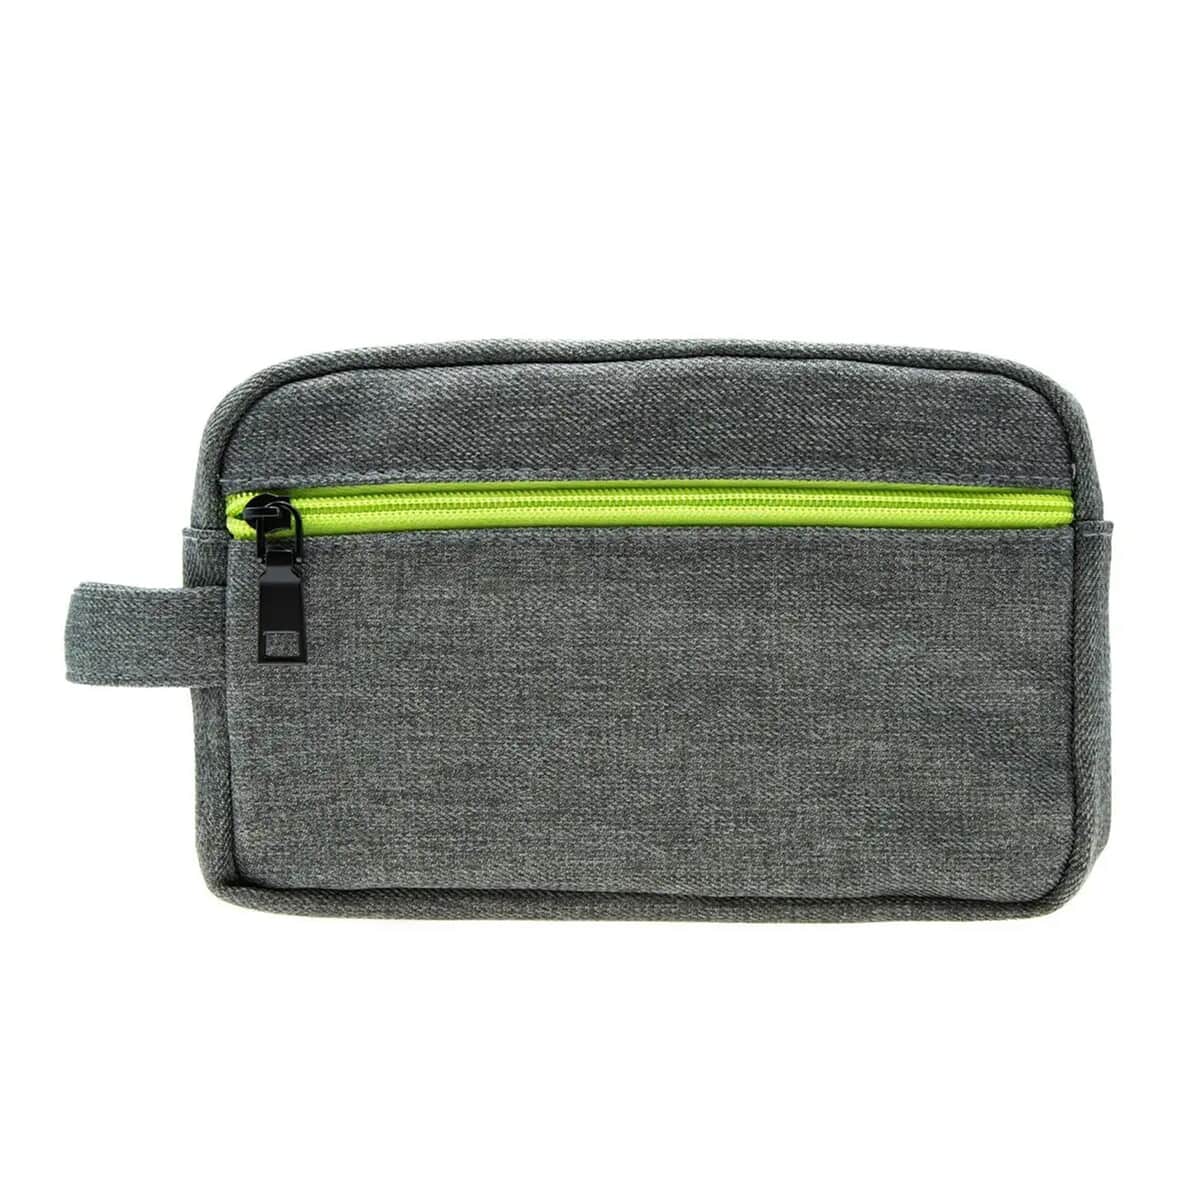 Gray Canvas Textured Dopp Kit With Lime Green Zipper (8.1"x5.35"x2.8") image number 0